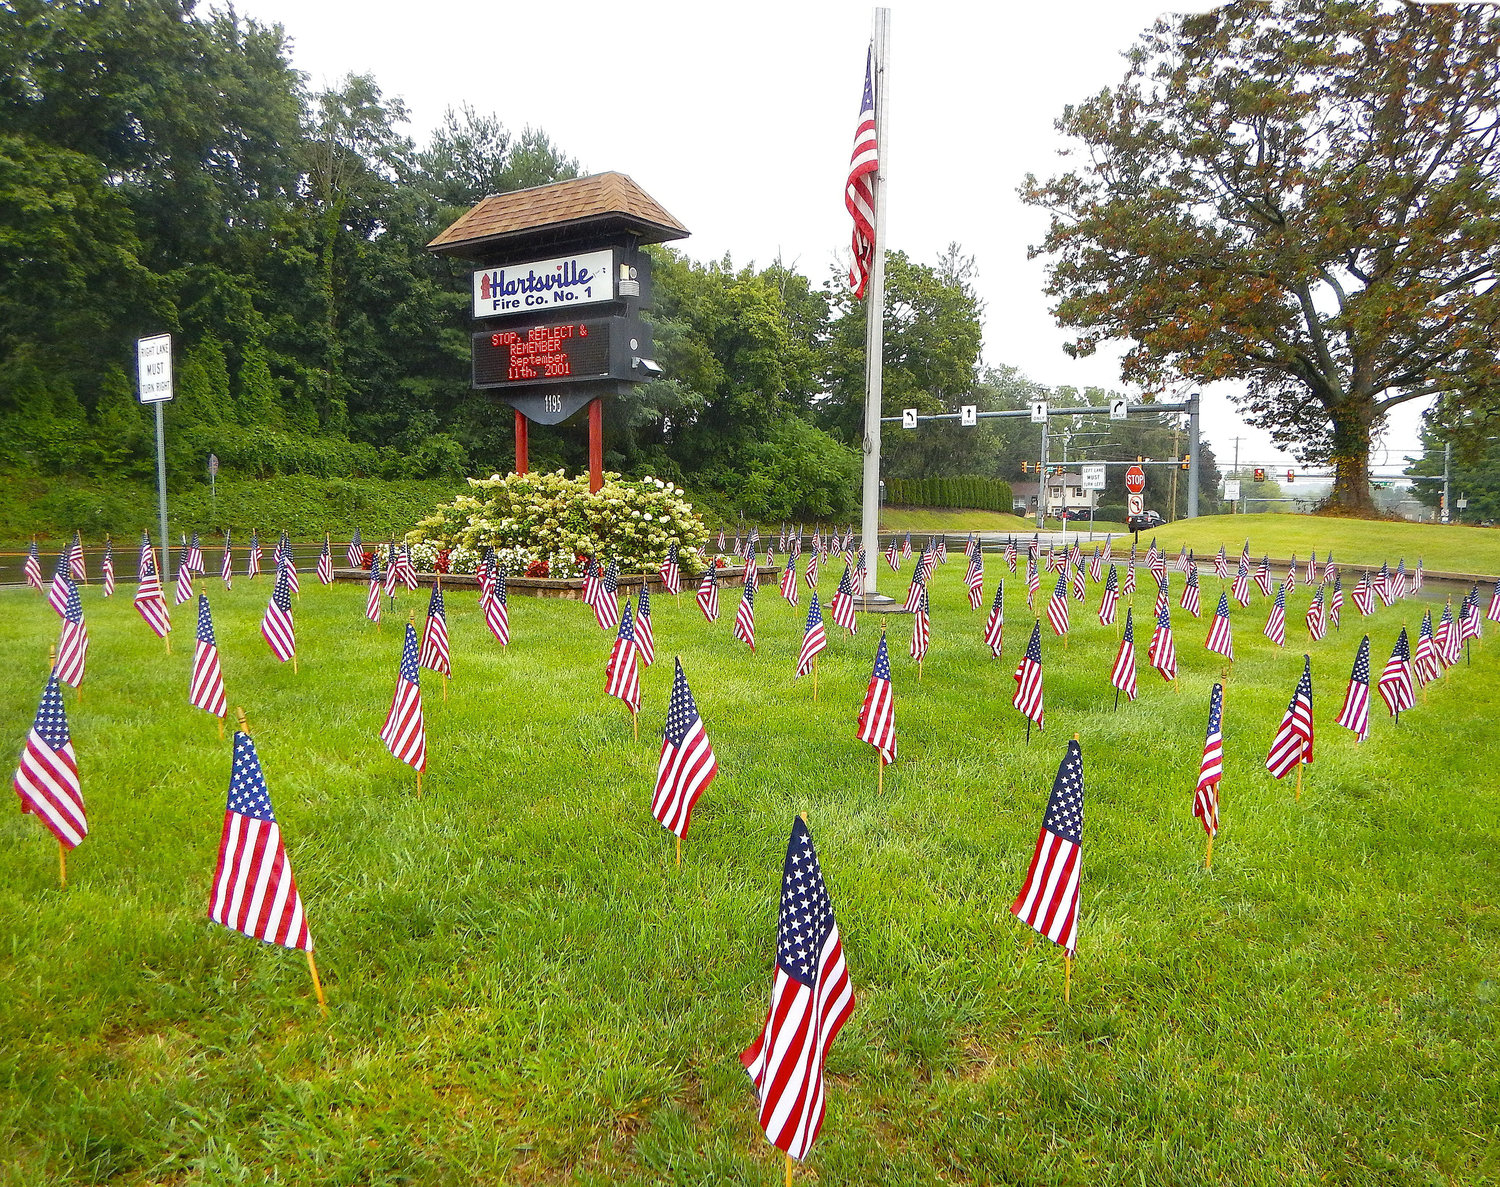 Hundreds of American flags adorn the lawn at Hartsville Fire Company.